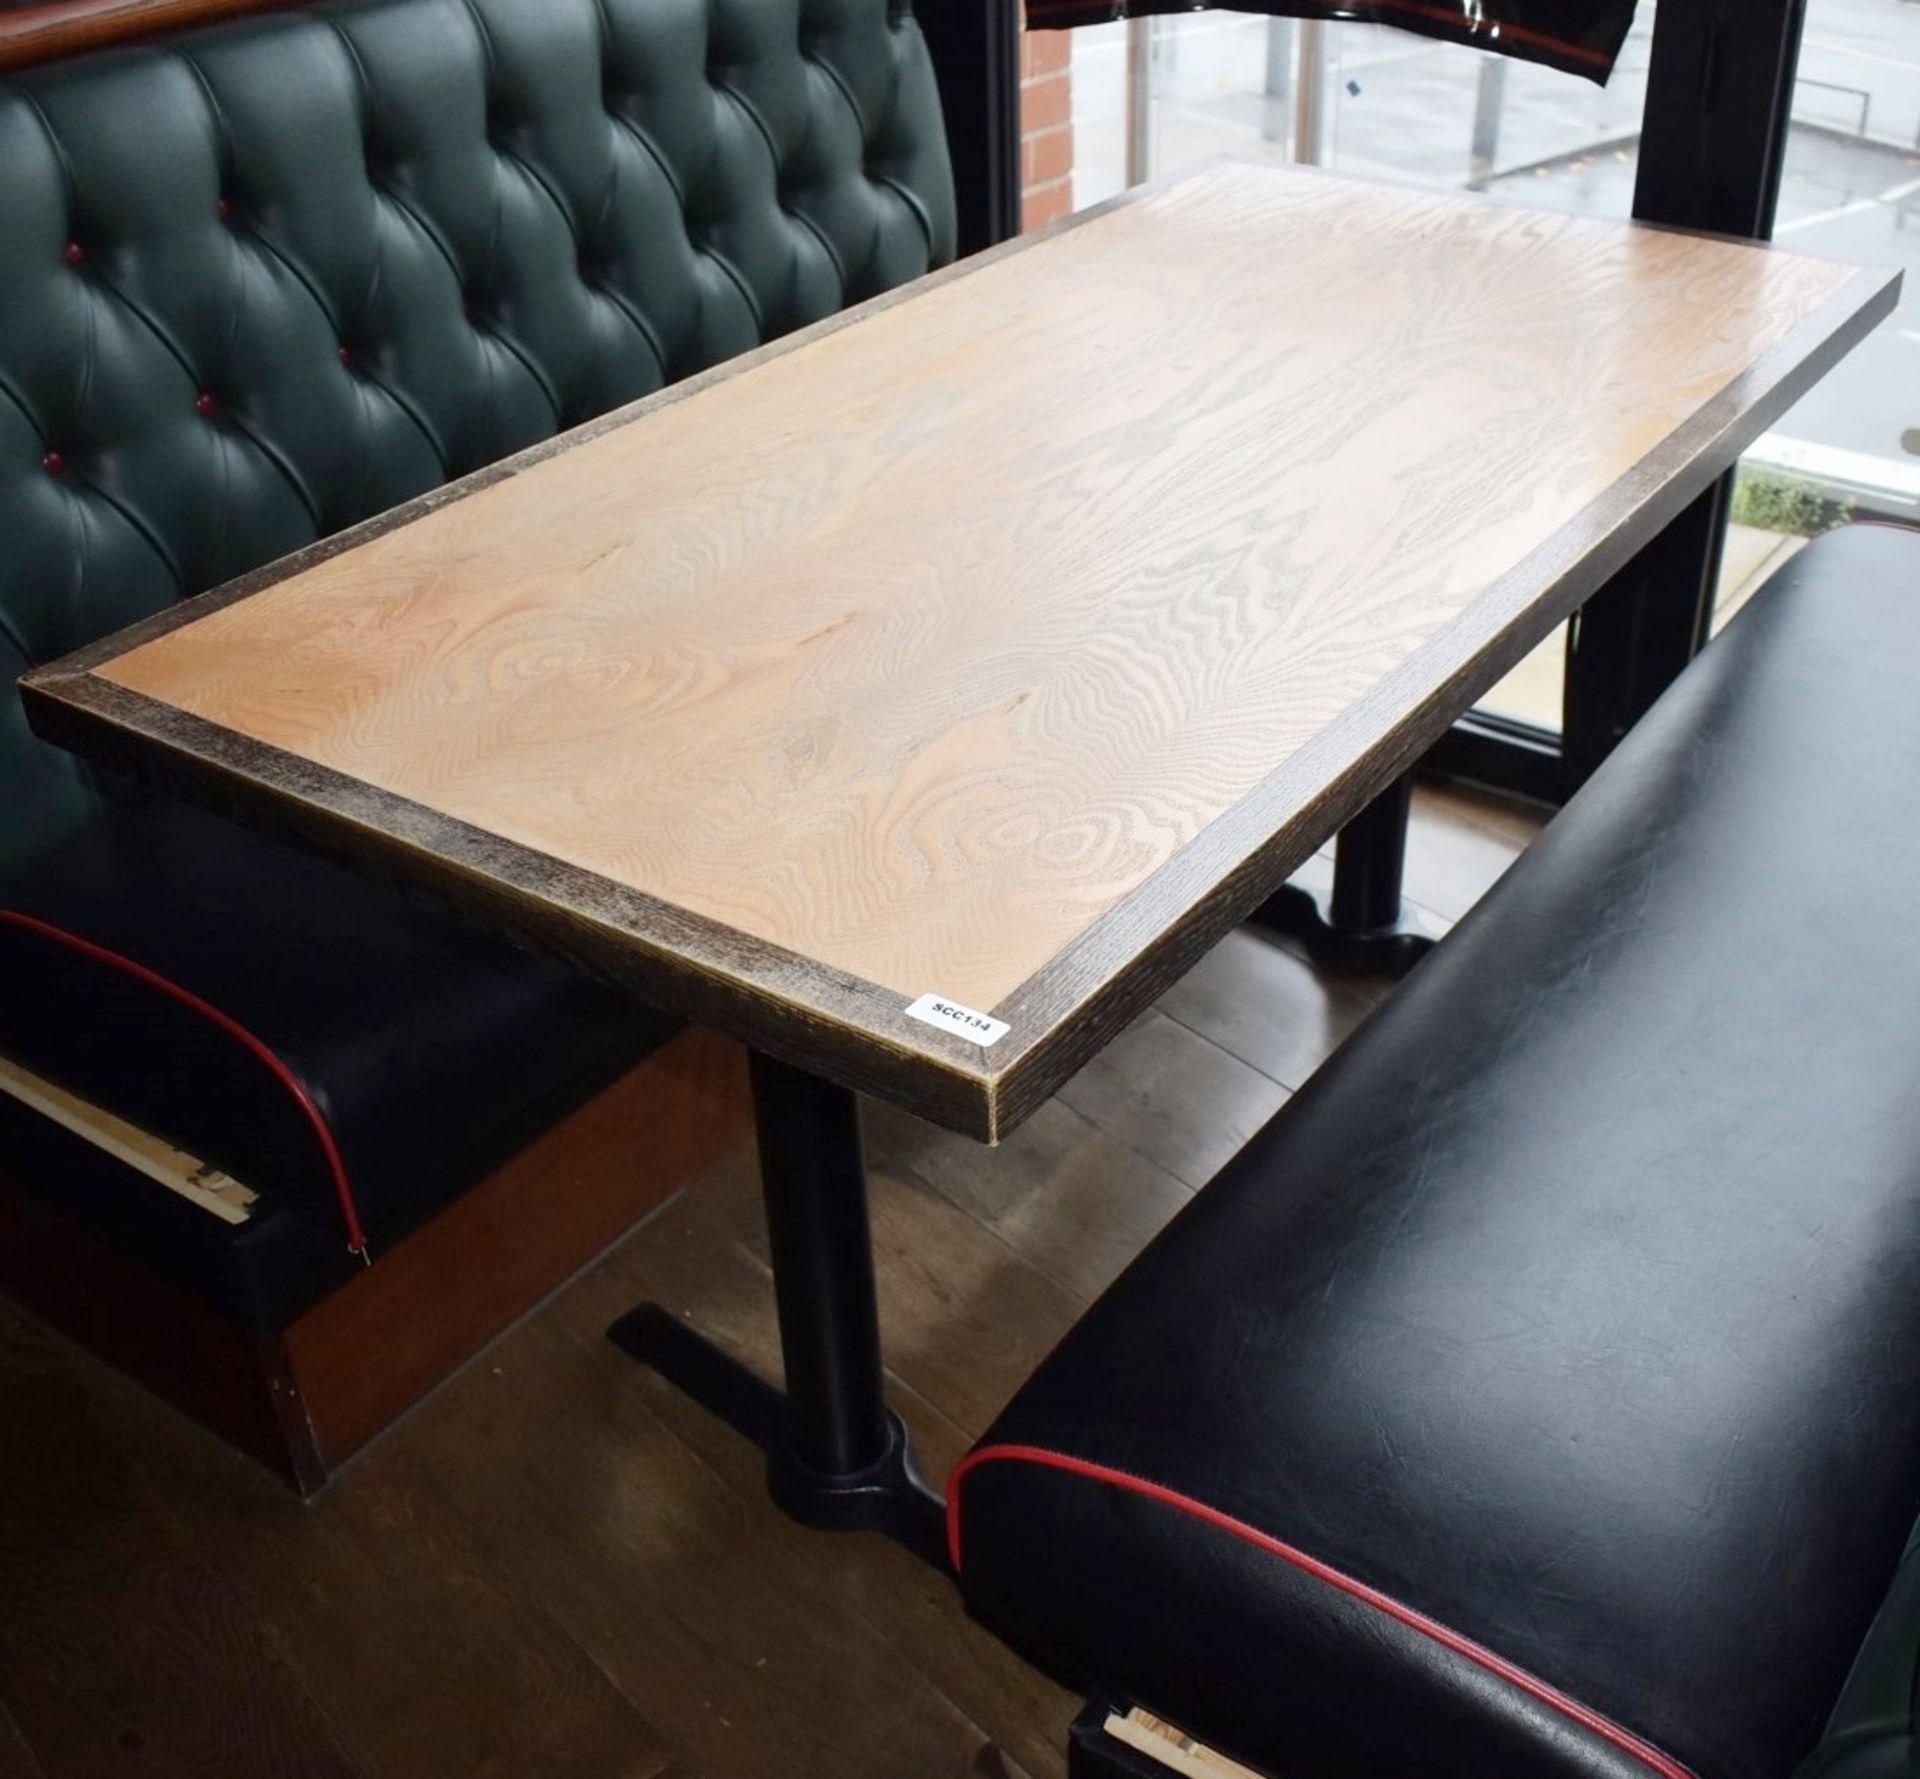 1 x Rectangular Restaurant Table - Seats Upto 4 Persons - Two Tone Wooden Top and Cast Iron Bases - Image 2 of 5